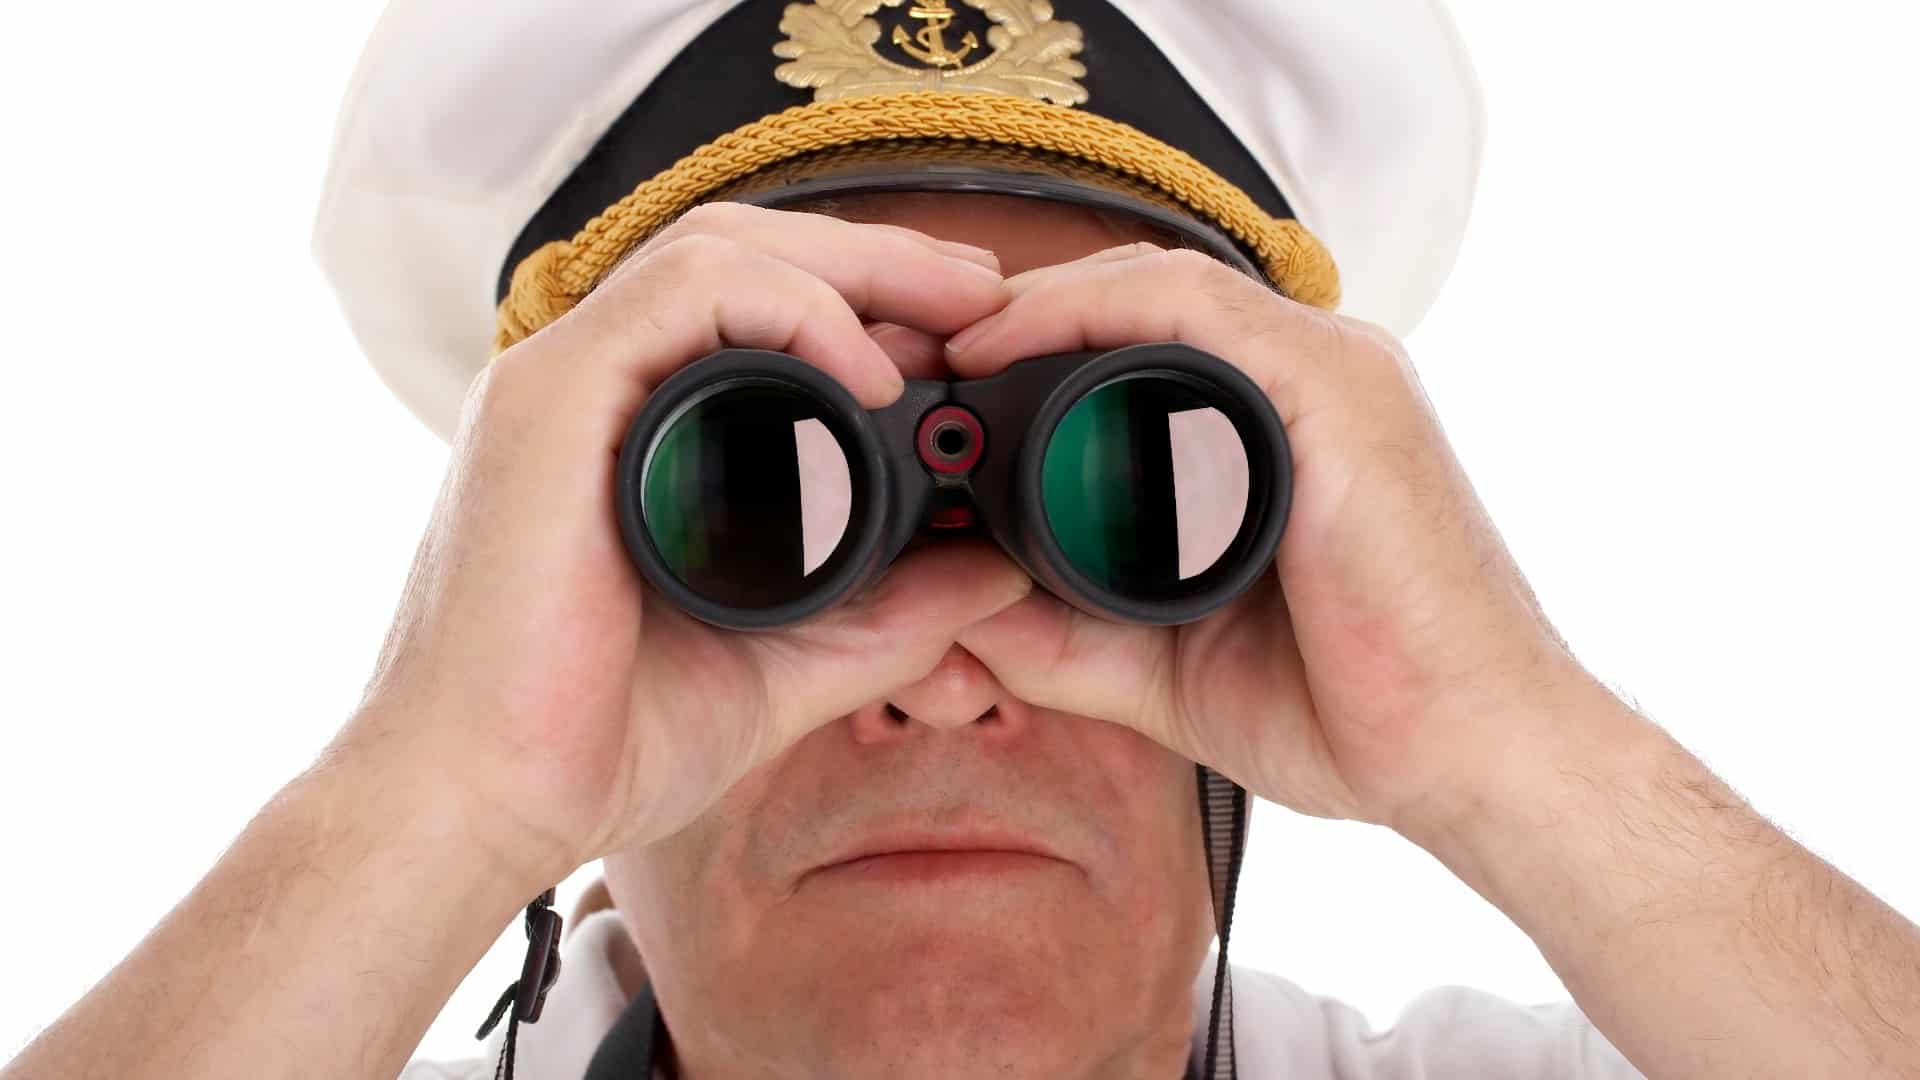 asx share price on watch represented by ship captain looking through binoculars